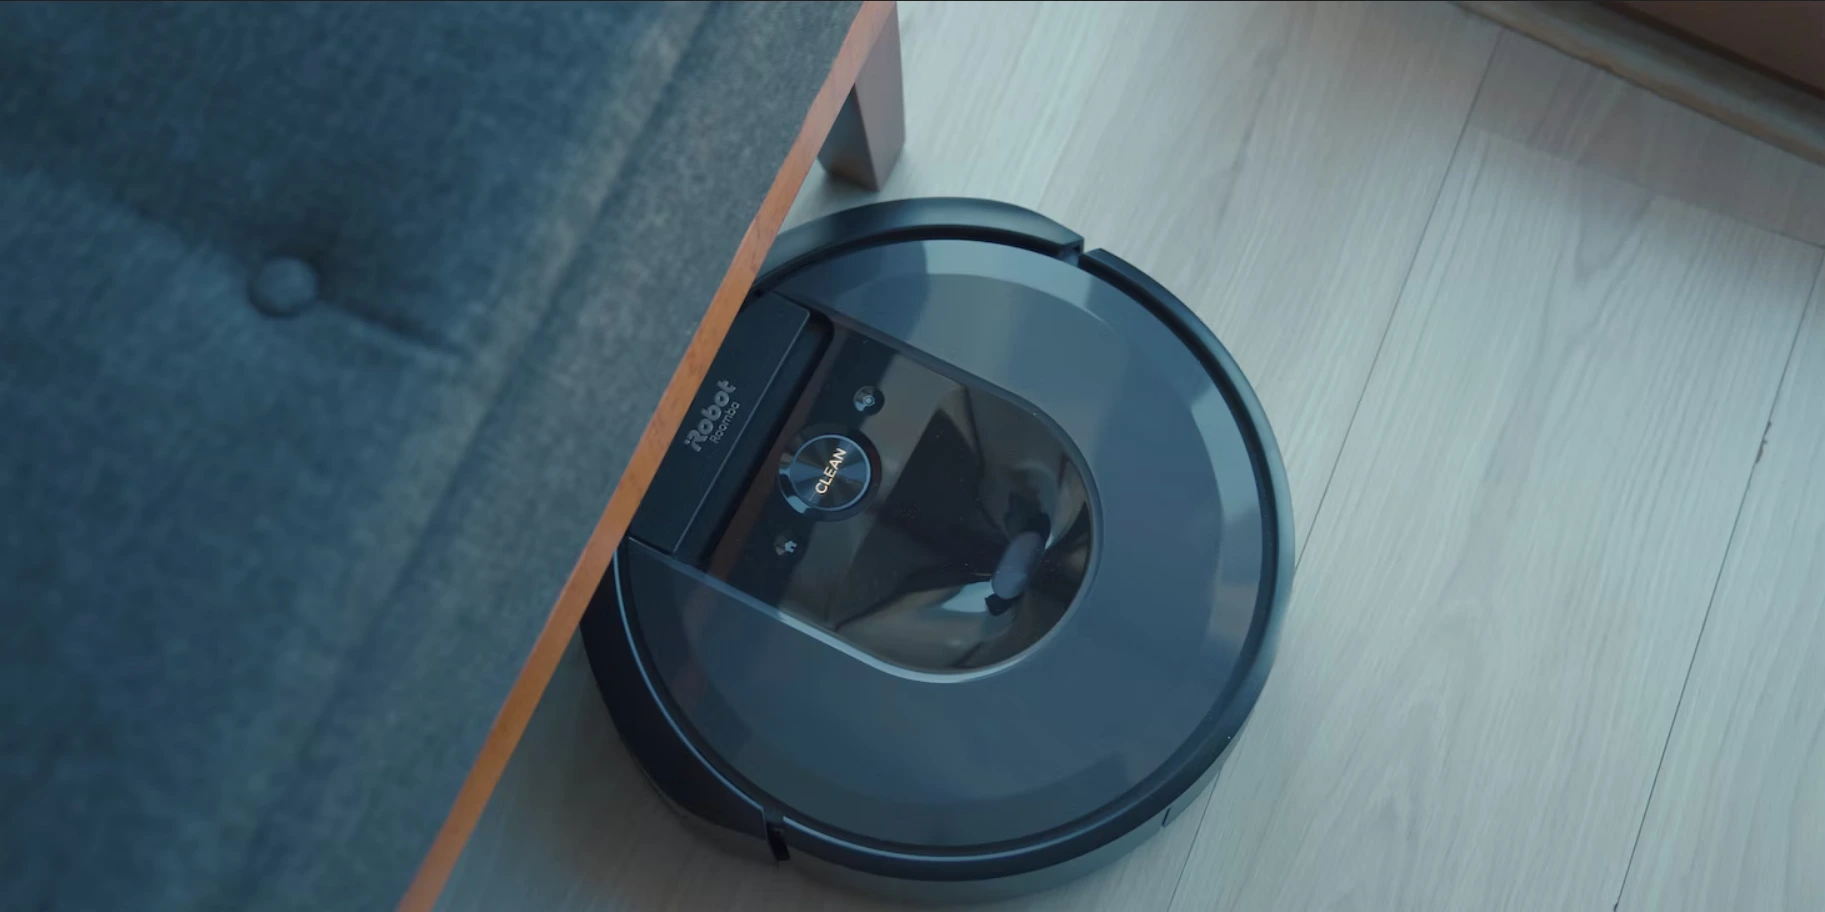 The Roomba j7+ from iRobot, which detects pet poop, is available at a $200 discount right now